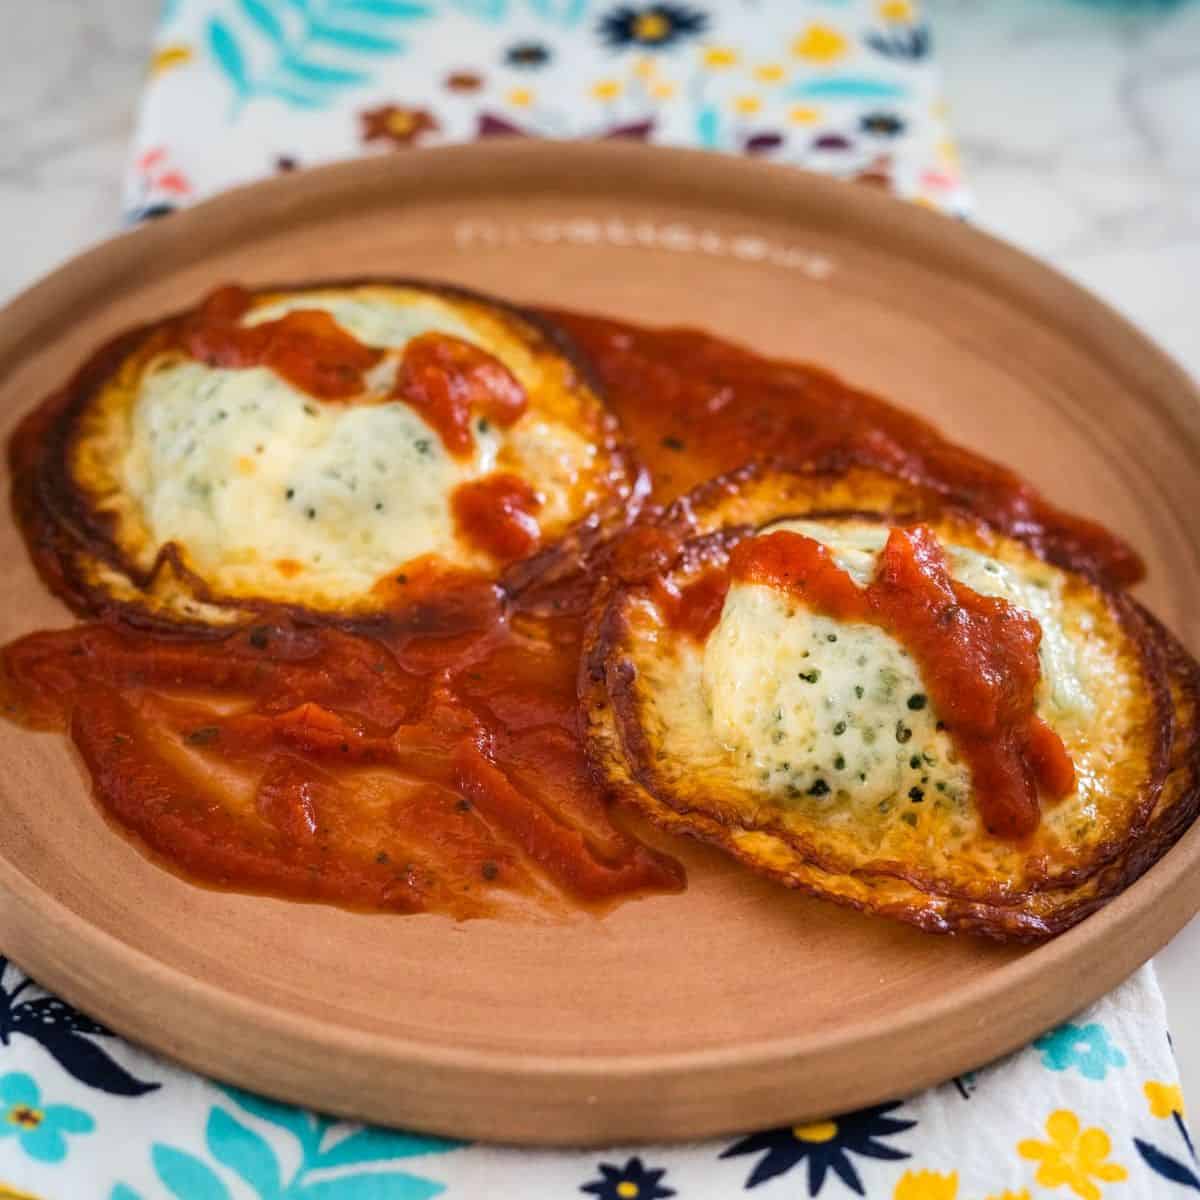 Two baked eggs in tomato sauce served on a round, clay plate with a floral napkin underneath.